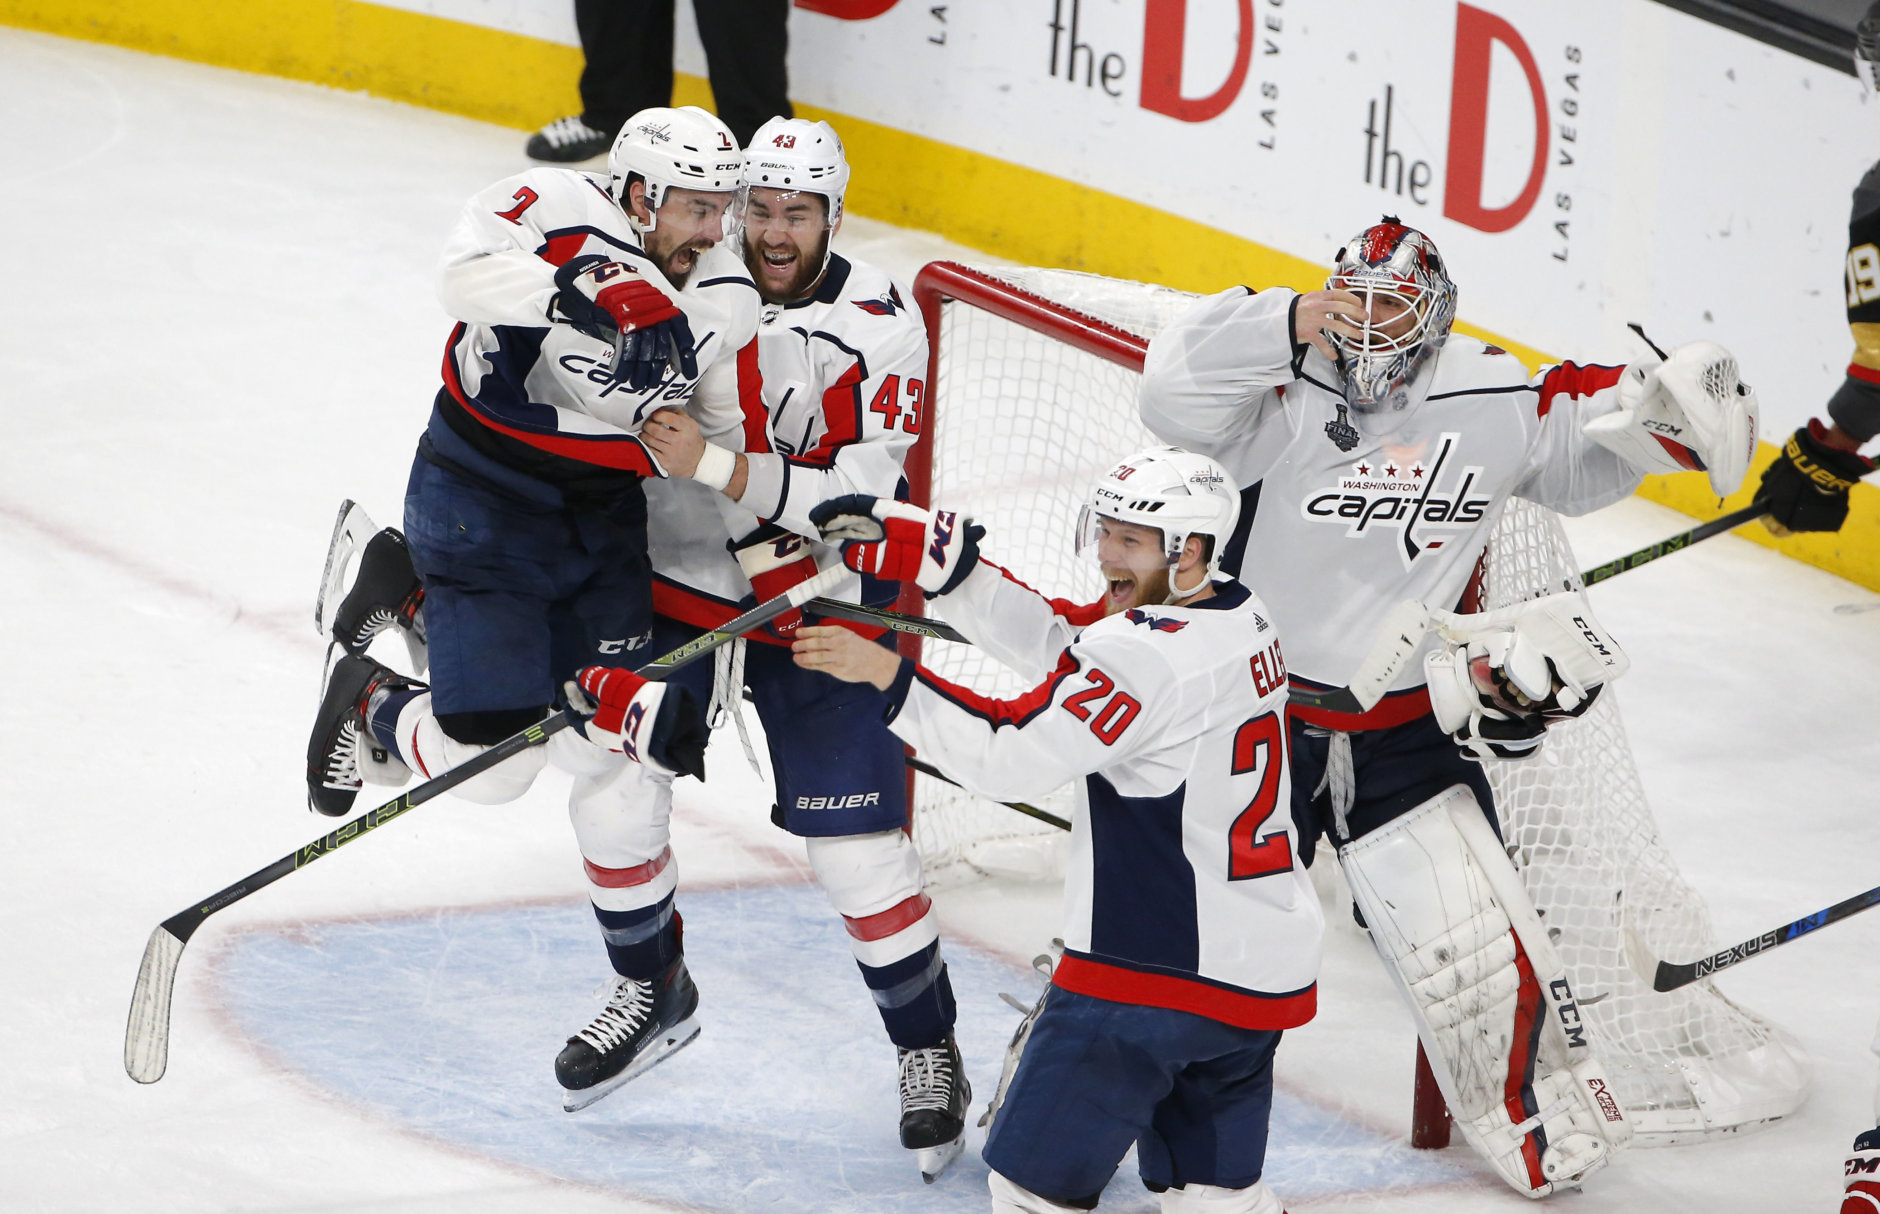 Members of the Washington Capitals celebrate as they defeat the Vegas Golden Knights in Game 5 of the NHL hockey Stanley Cup Finals to win the Stanley Cup Thursday, June 7, 2018, in Las Vegas. (AP Photo/Ross D. Franklin)